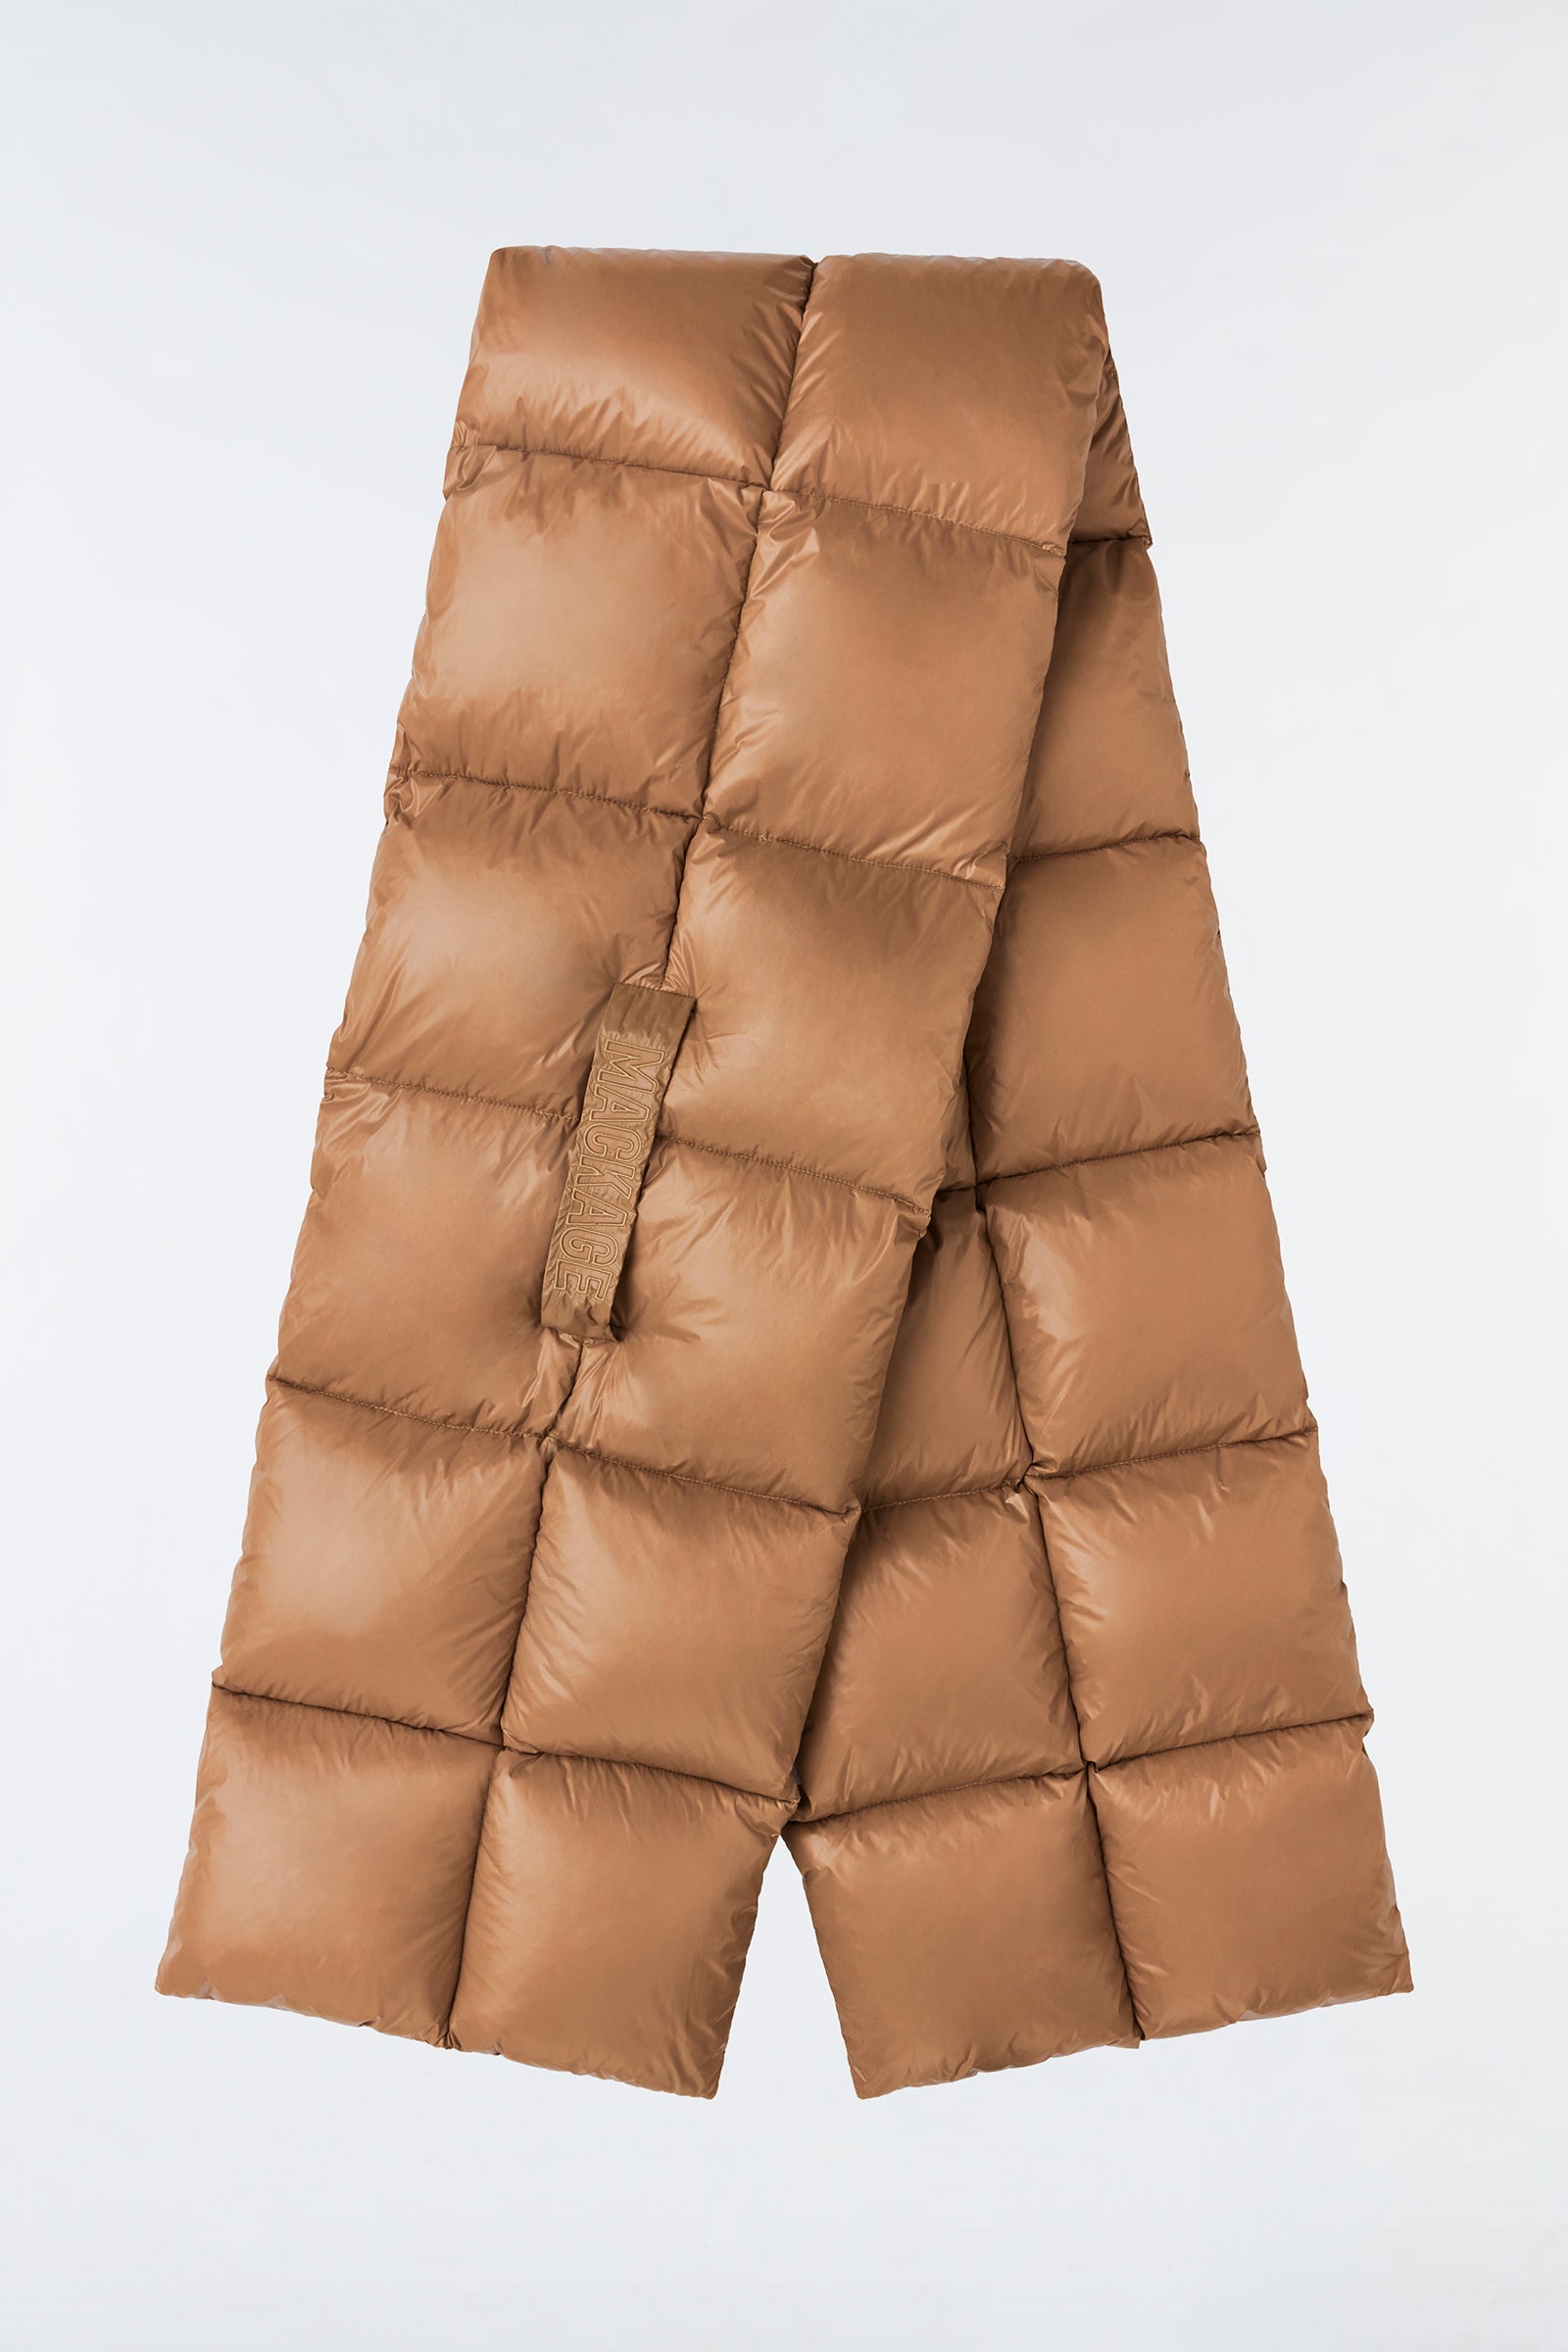 Mackage River C2 Puffed Scarf in Camel